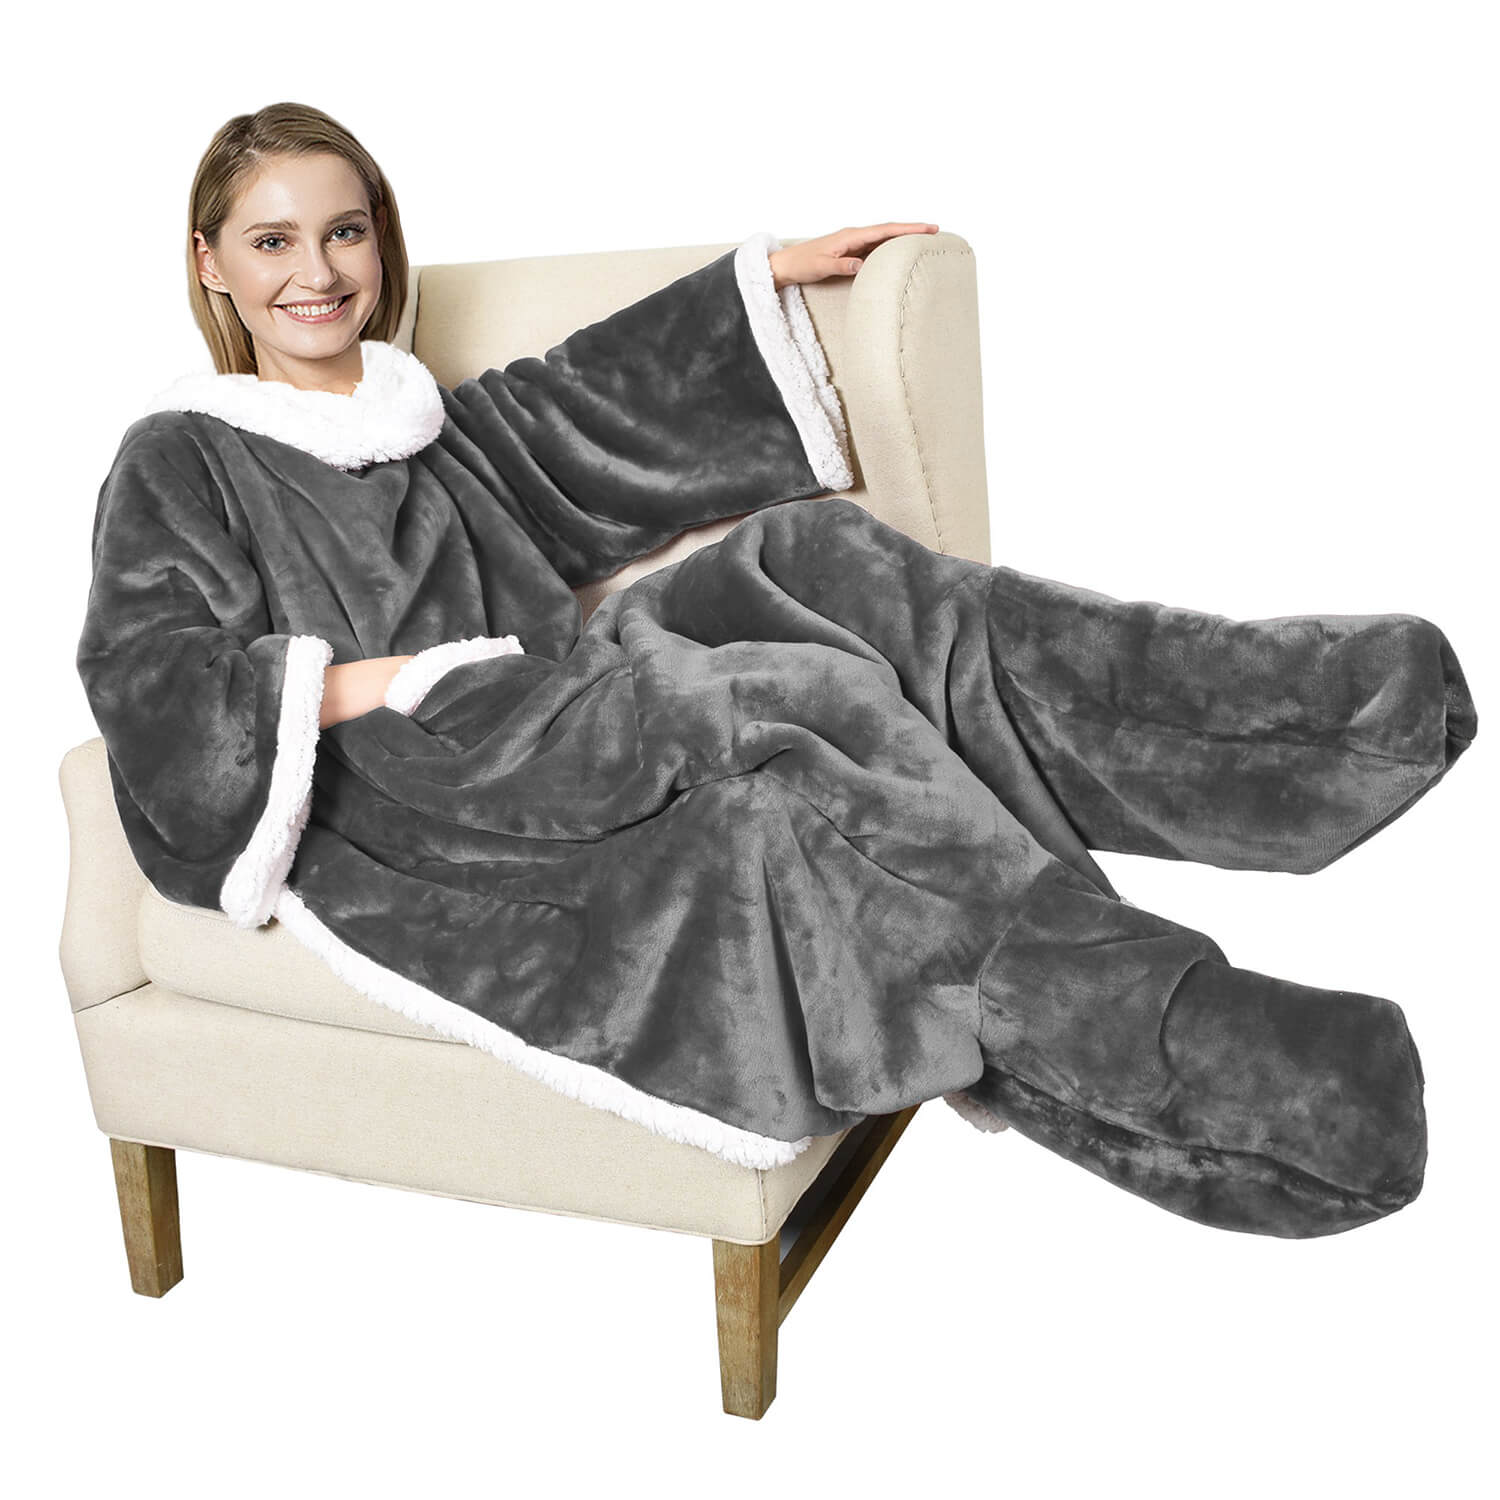 The Home Bedroom TV Blanket - Grey 1 Shaws Department Stores